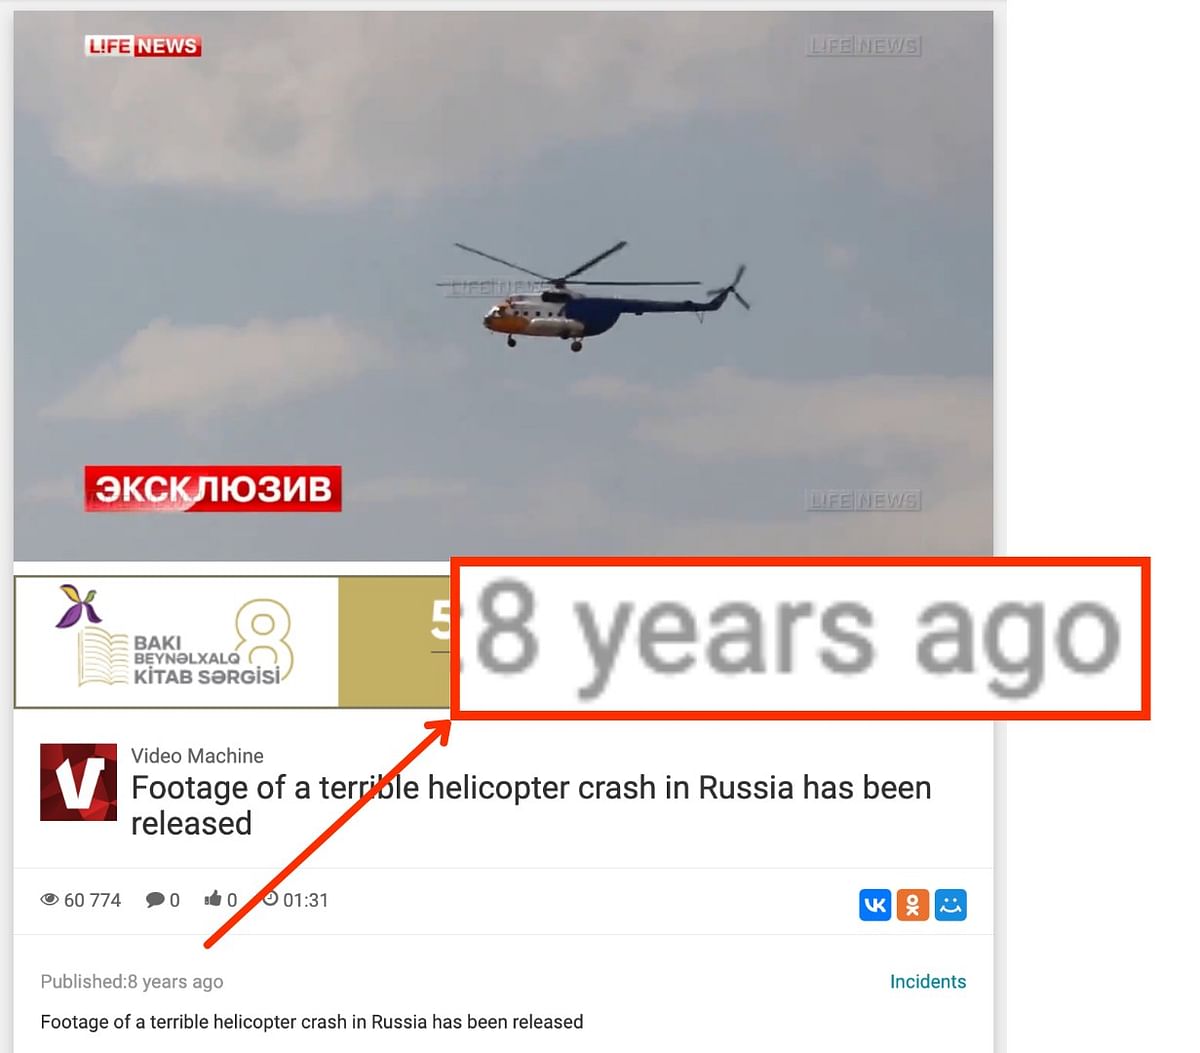 The video dates back to 4 September 2014 and shows a helicopter crash at Gelendzhik Airport in Krasnodar, Russia.